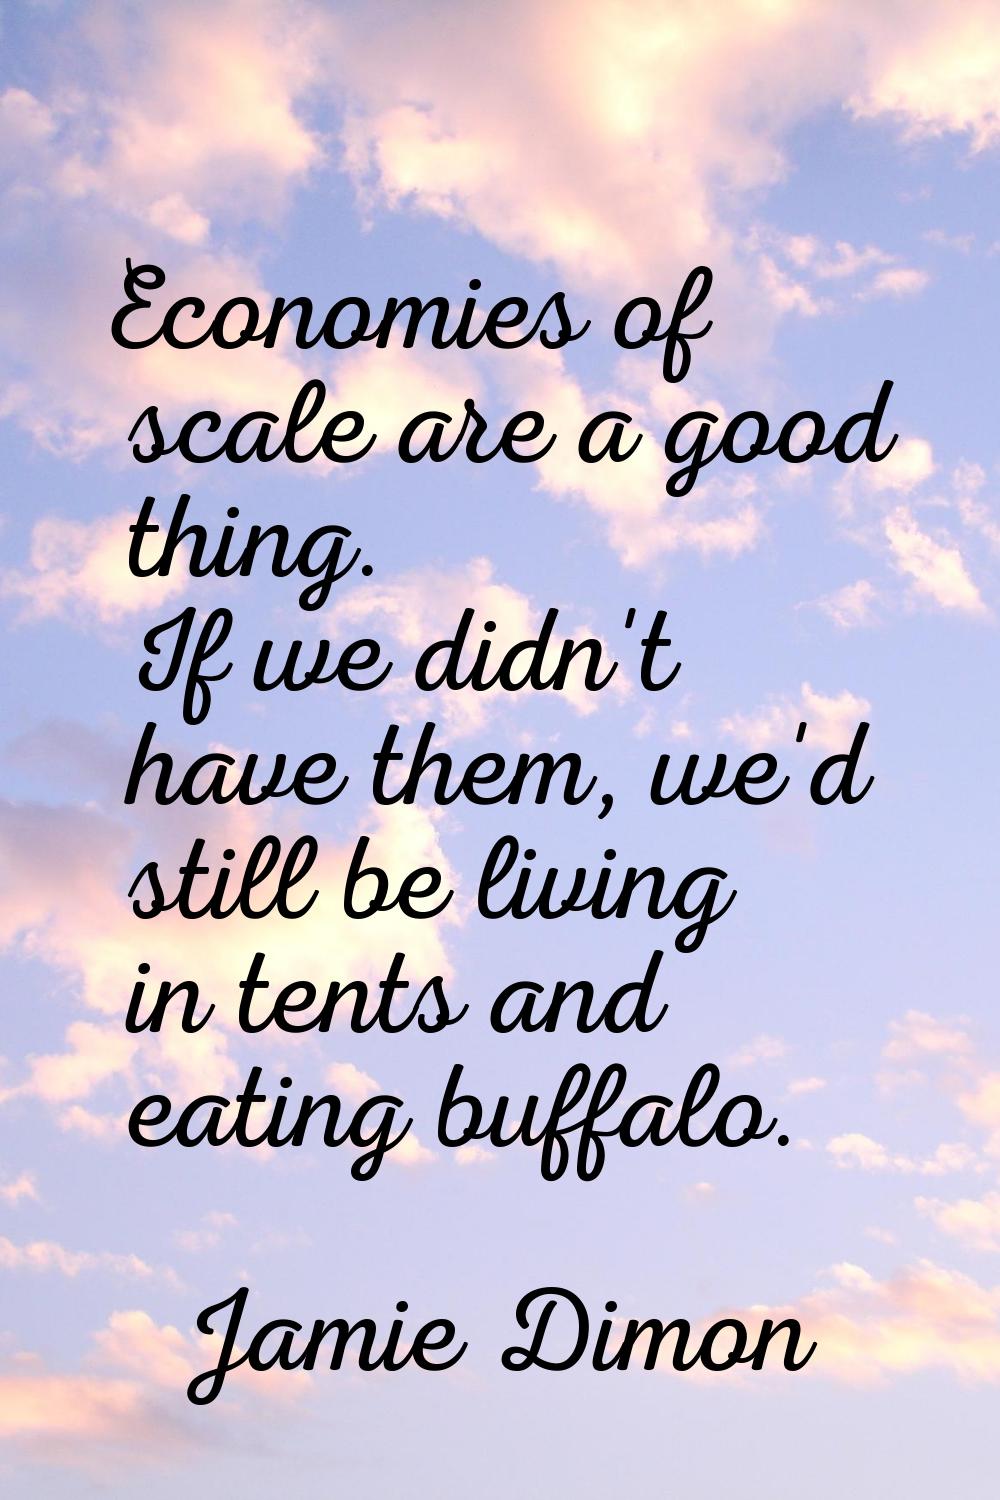 Economies of scale are a good thing. If we didn't have them, we'd still be living in tents and eati